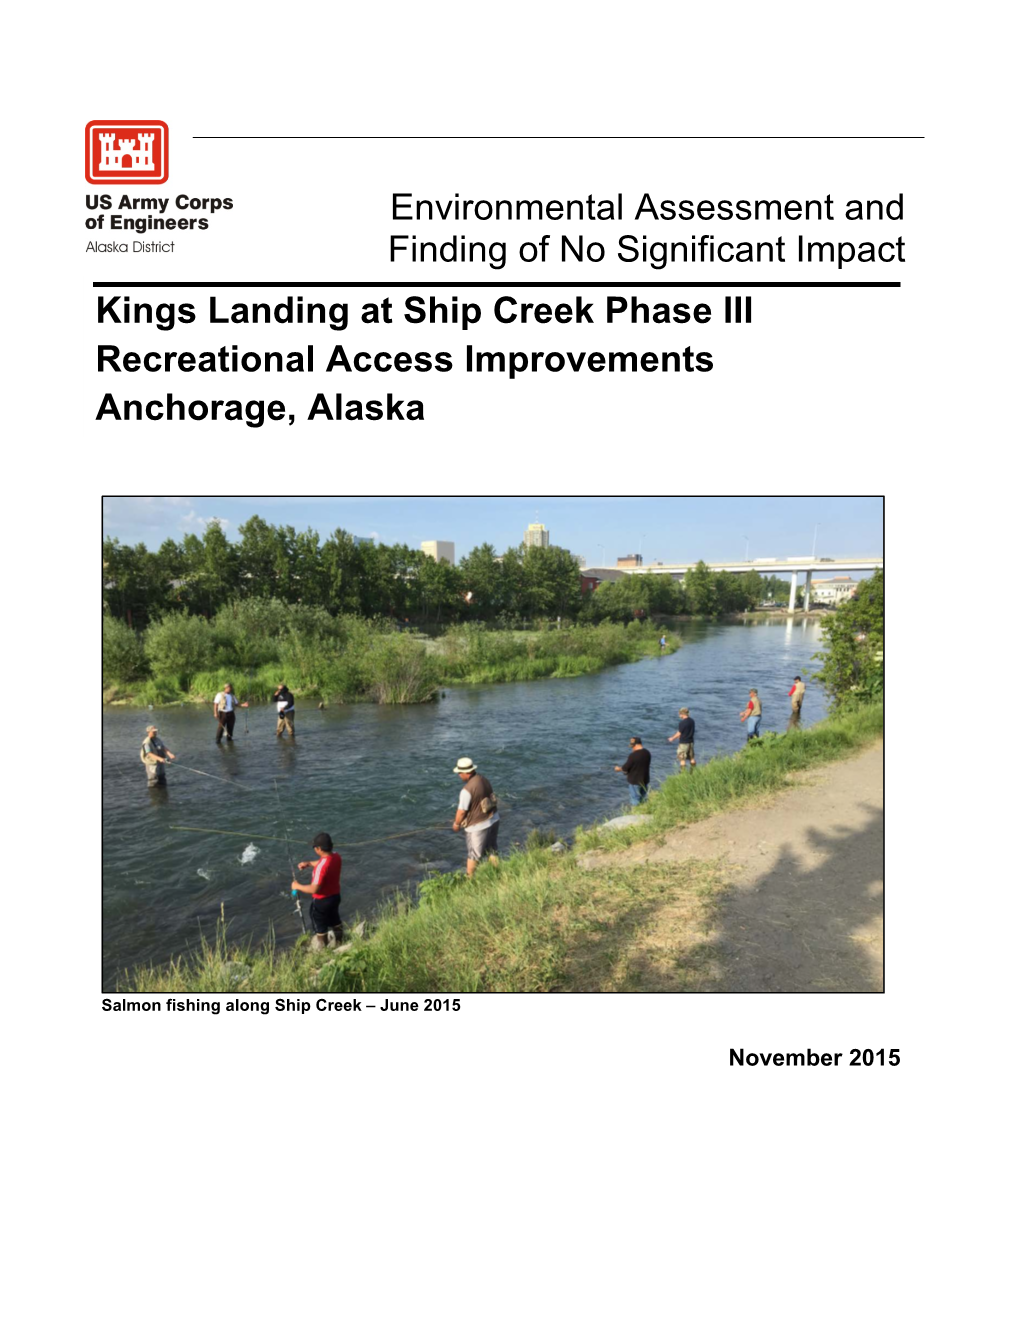 Environmental Assessment and Finding of No Significant Impact Kings Landing at Ship Creek Phase III Recreational Access Improvem